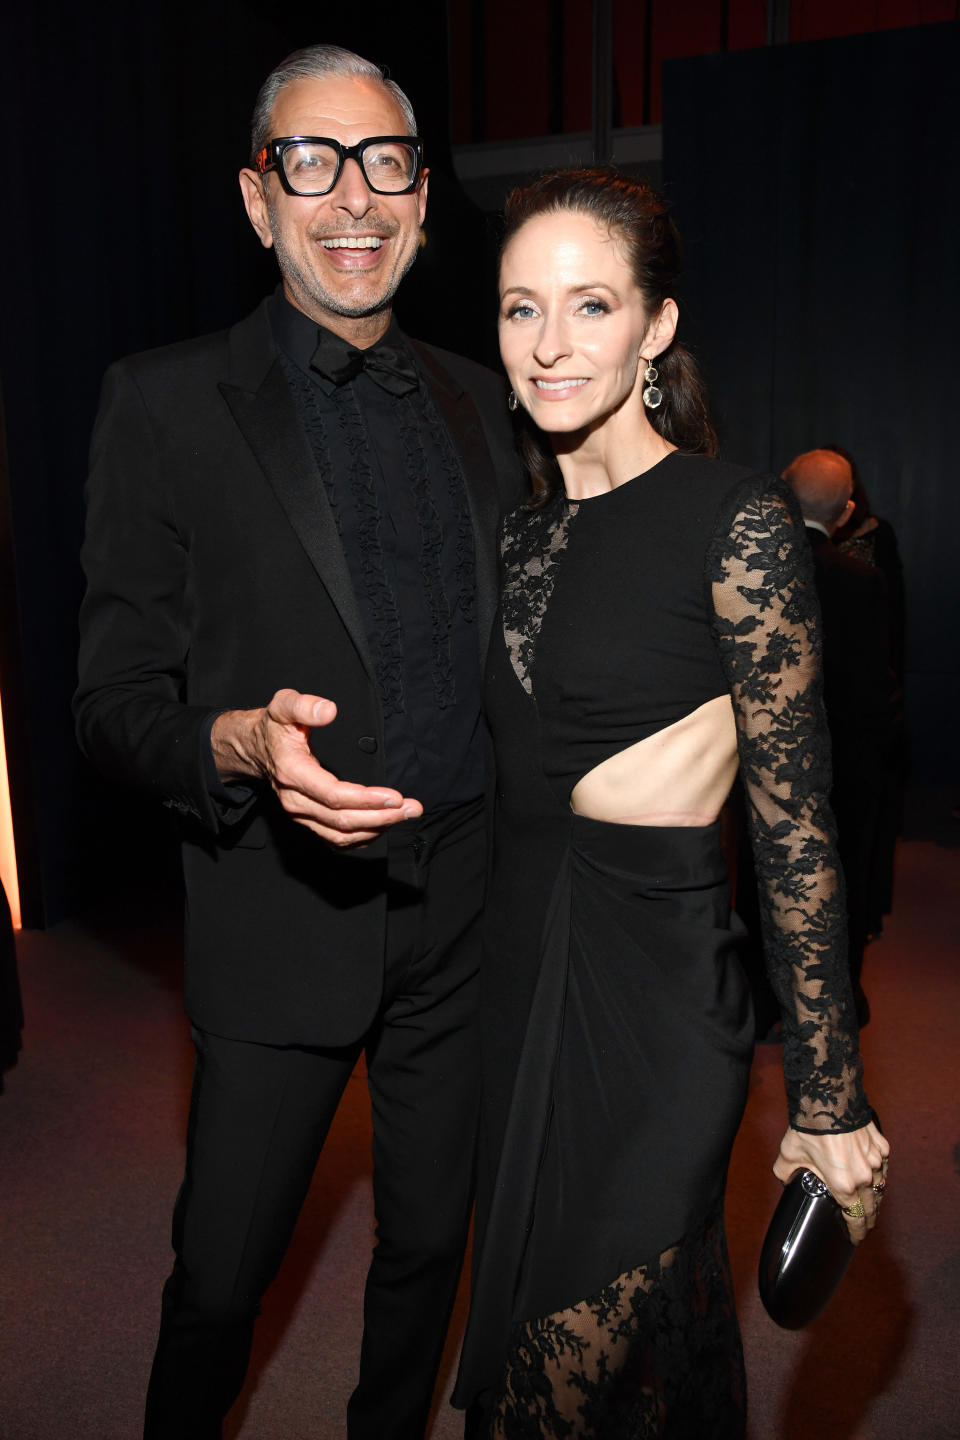 Jeff Goldblum and Emilie Livingston attend the 2020 Vanity Fair Oscar Party in 2020